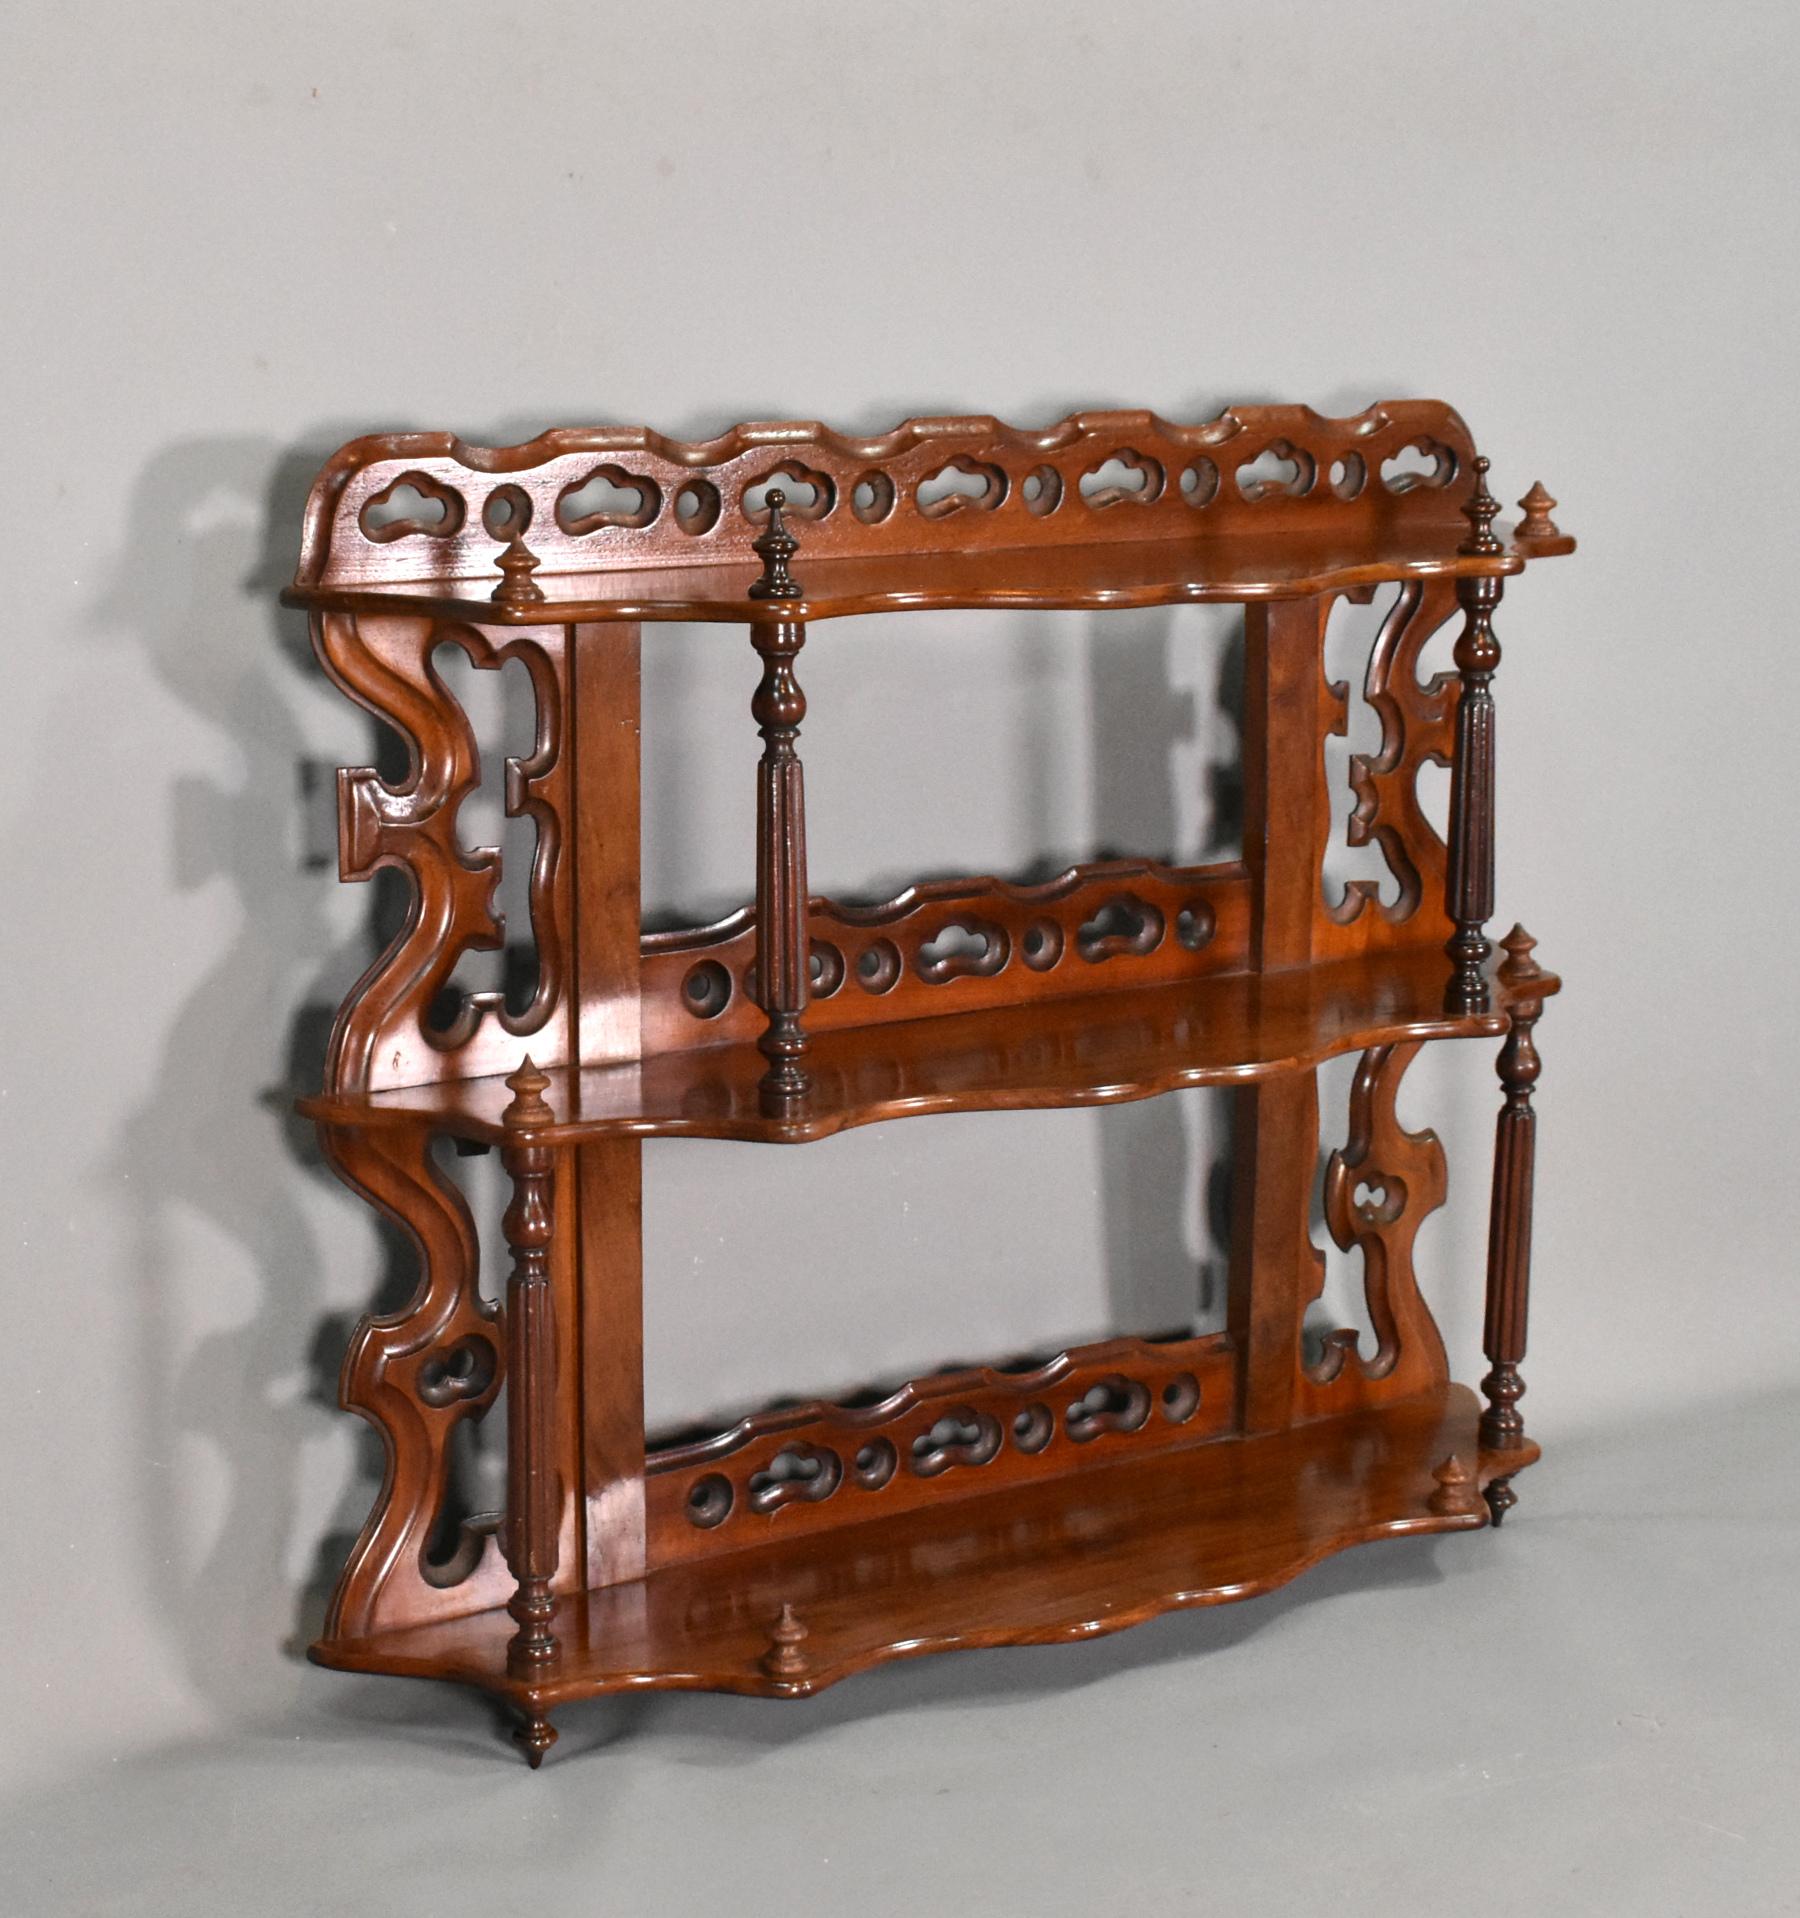 Antique French wall hanging shelves Etagere Louis Philippe Style 19th Century

This beautifully designed Wall Shelf is made of solid mahogany with three matching shelves divided by accurately turned columns of different heights. 

Each shelf